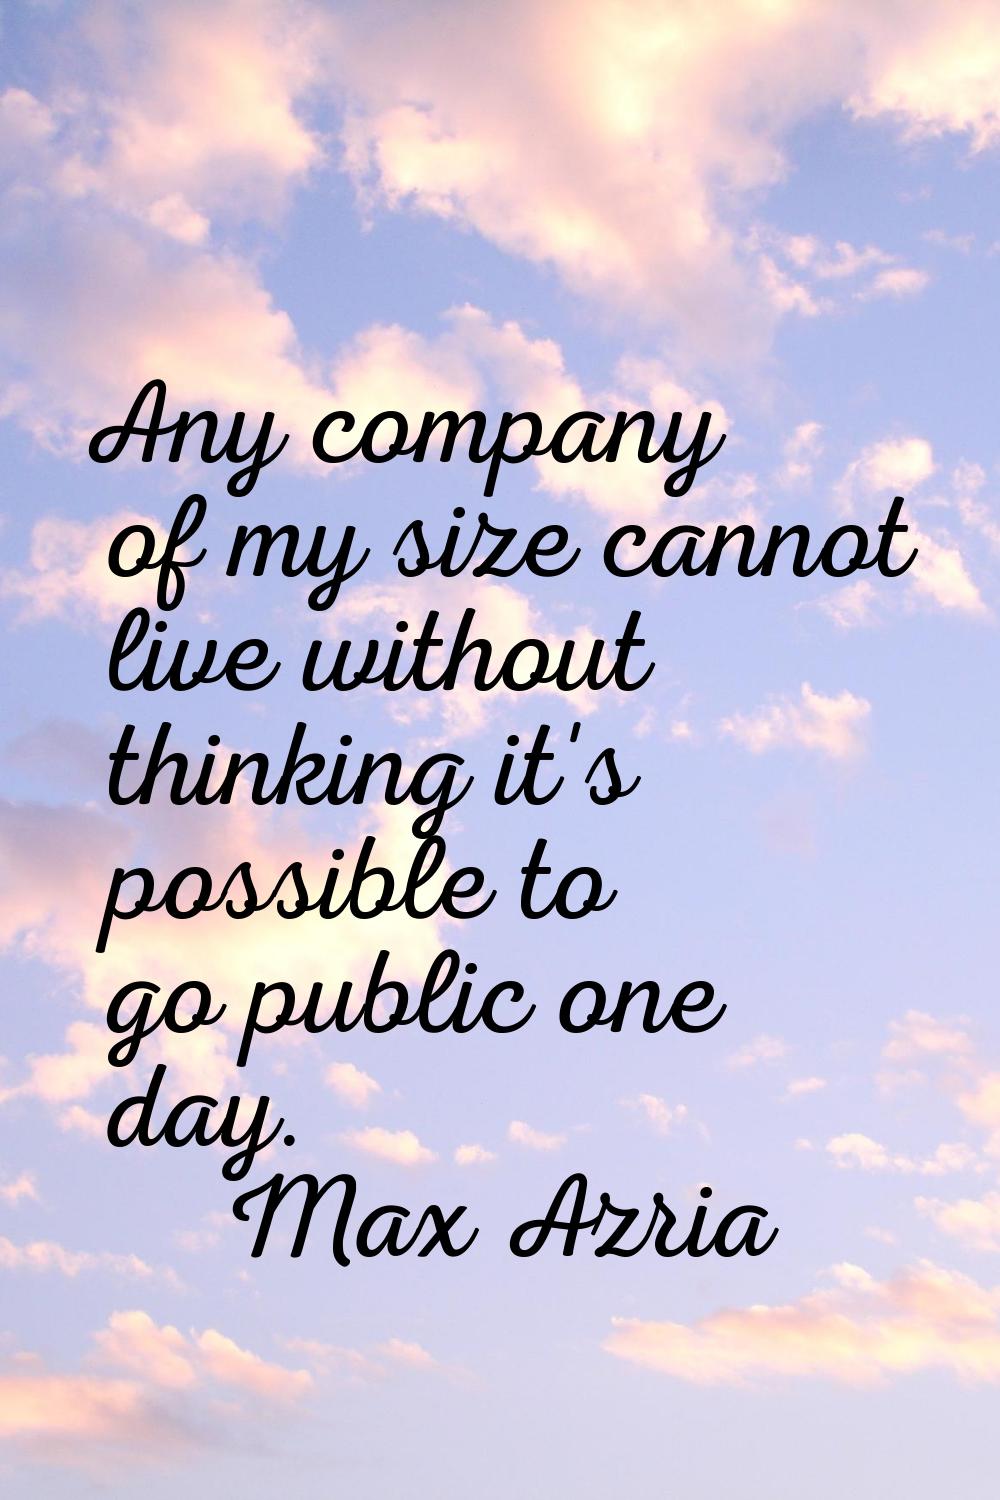 Any company of my size cannot live without thinking it's possible to go public one day.